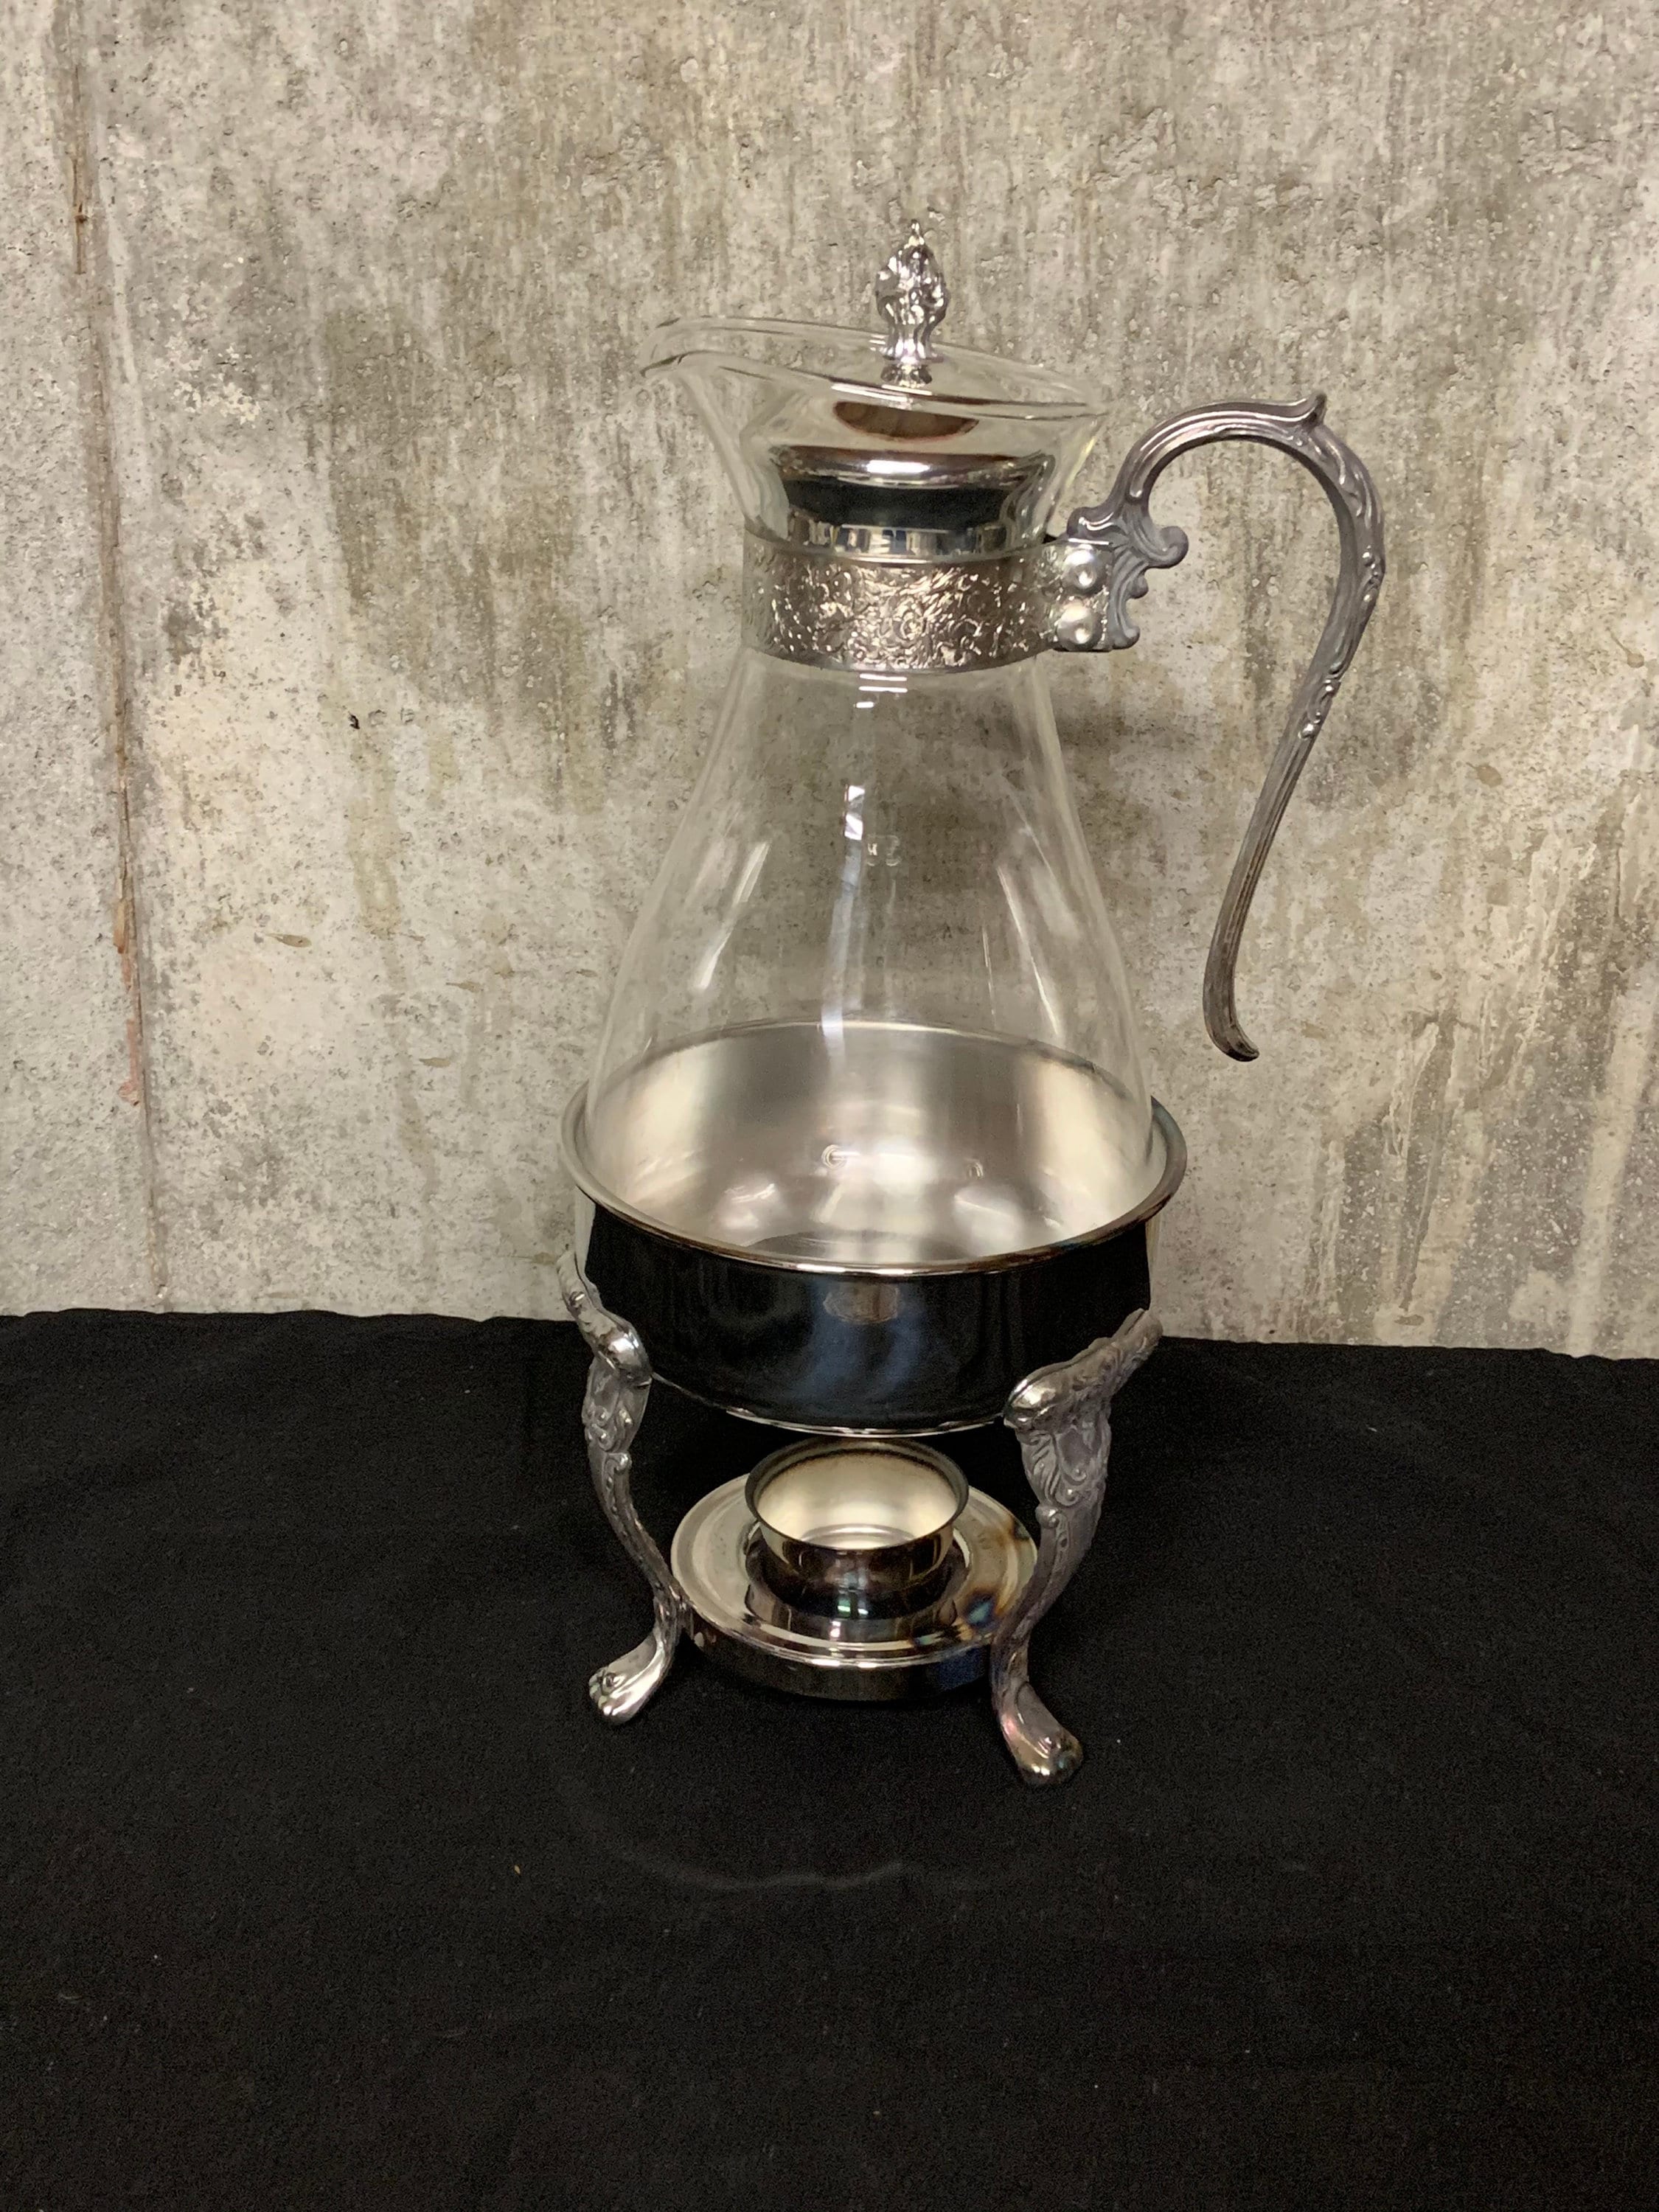 Vintage Silver Plate & Glass Coffee / Tea Carafe Pitcher With Warmer Stand